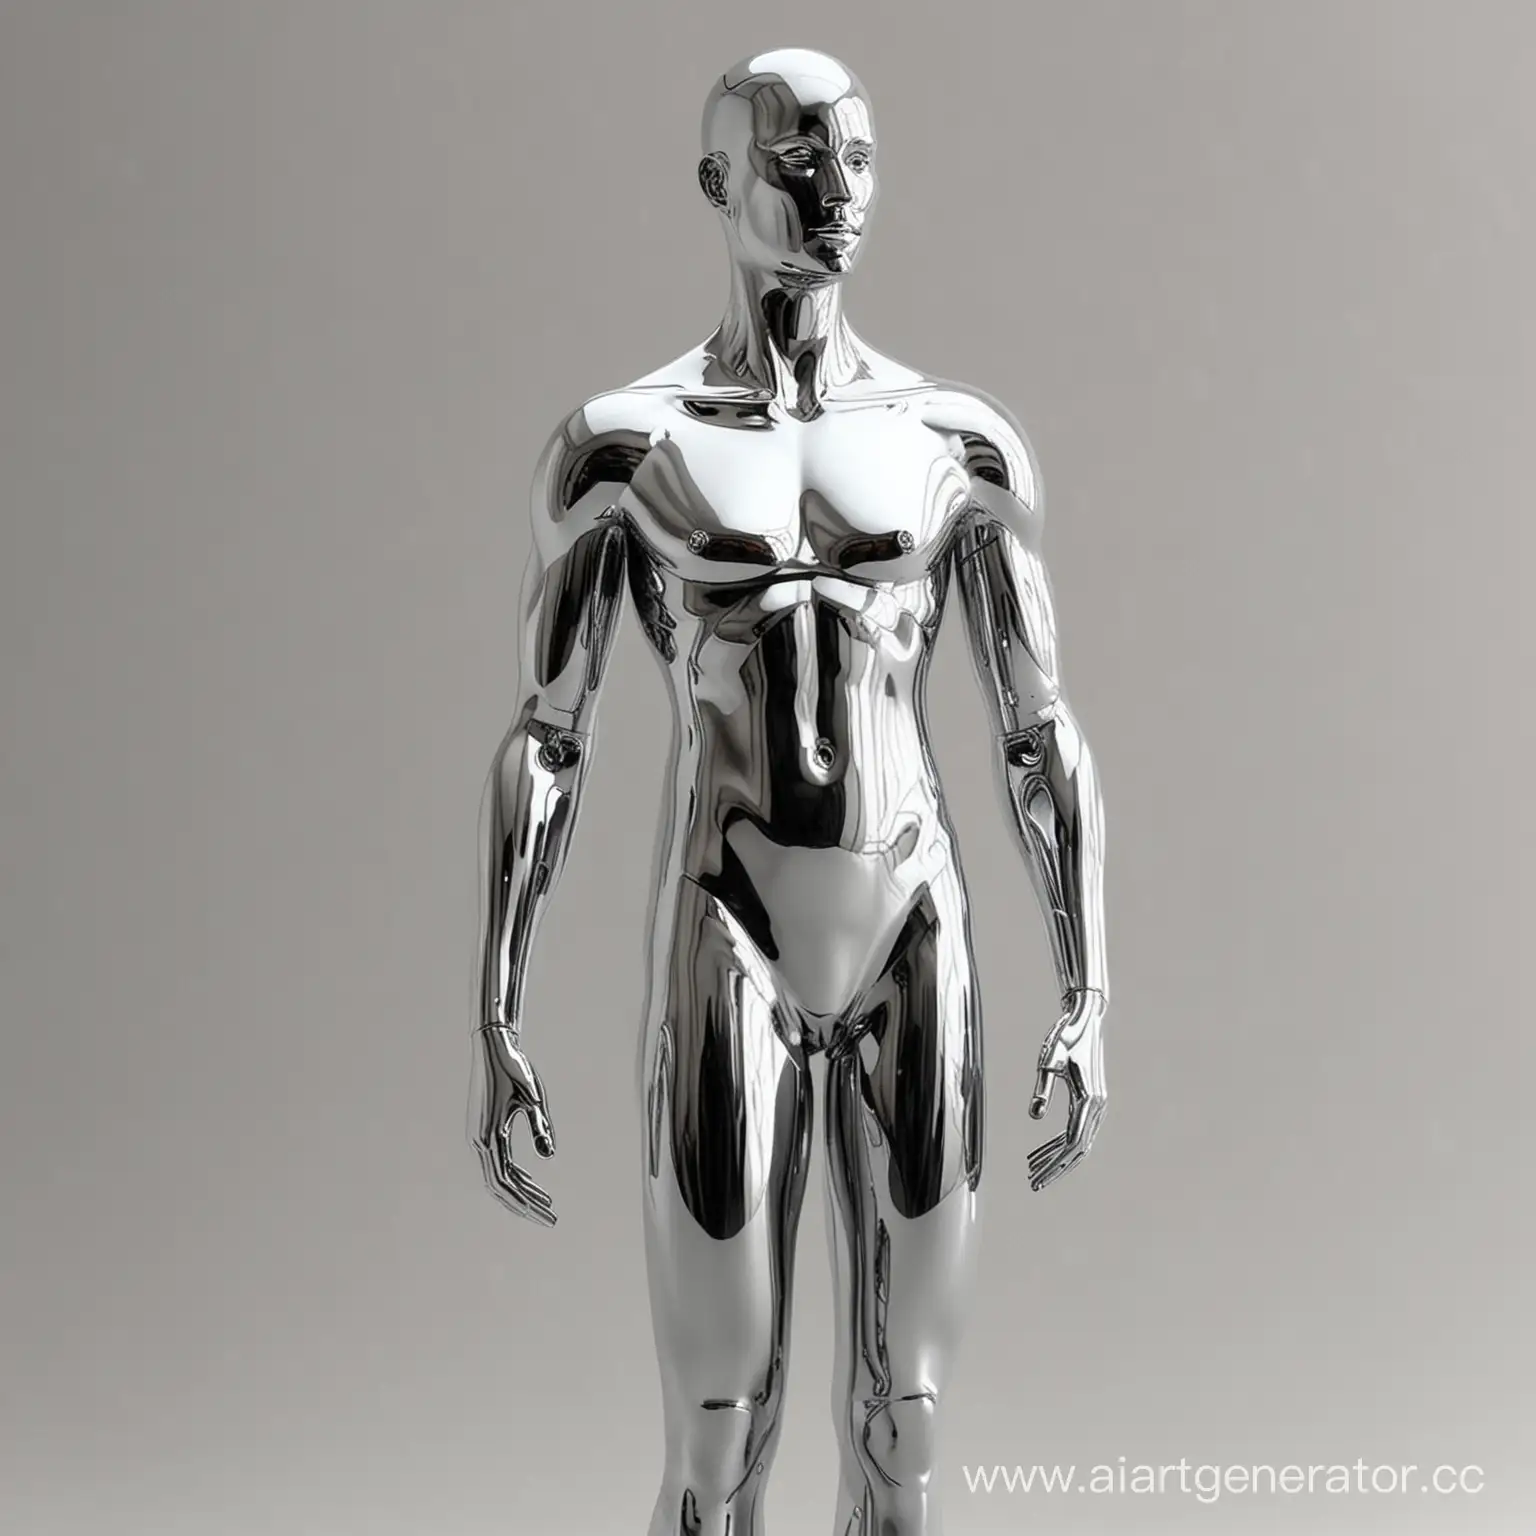 A simple and elegant human figure, stylized to a minimum of details, chrome plating gives the sculpture a modern and stylish look, realistic